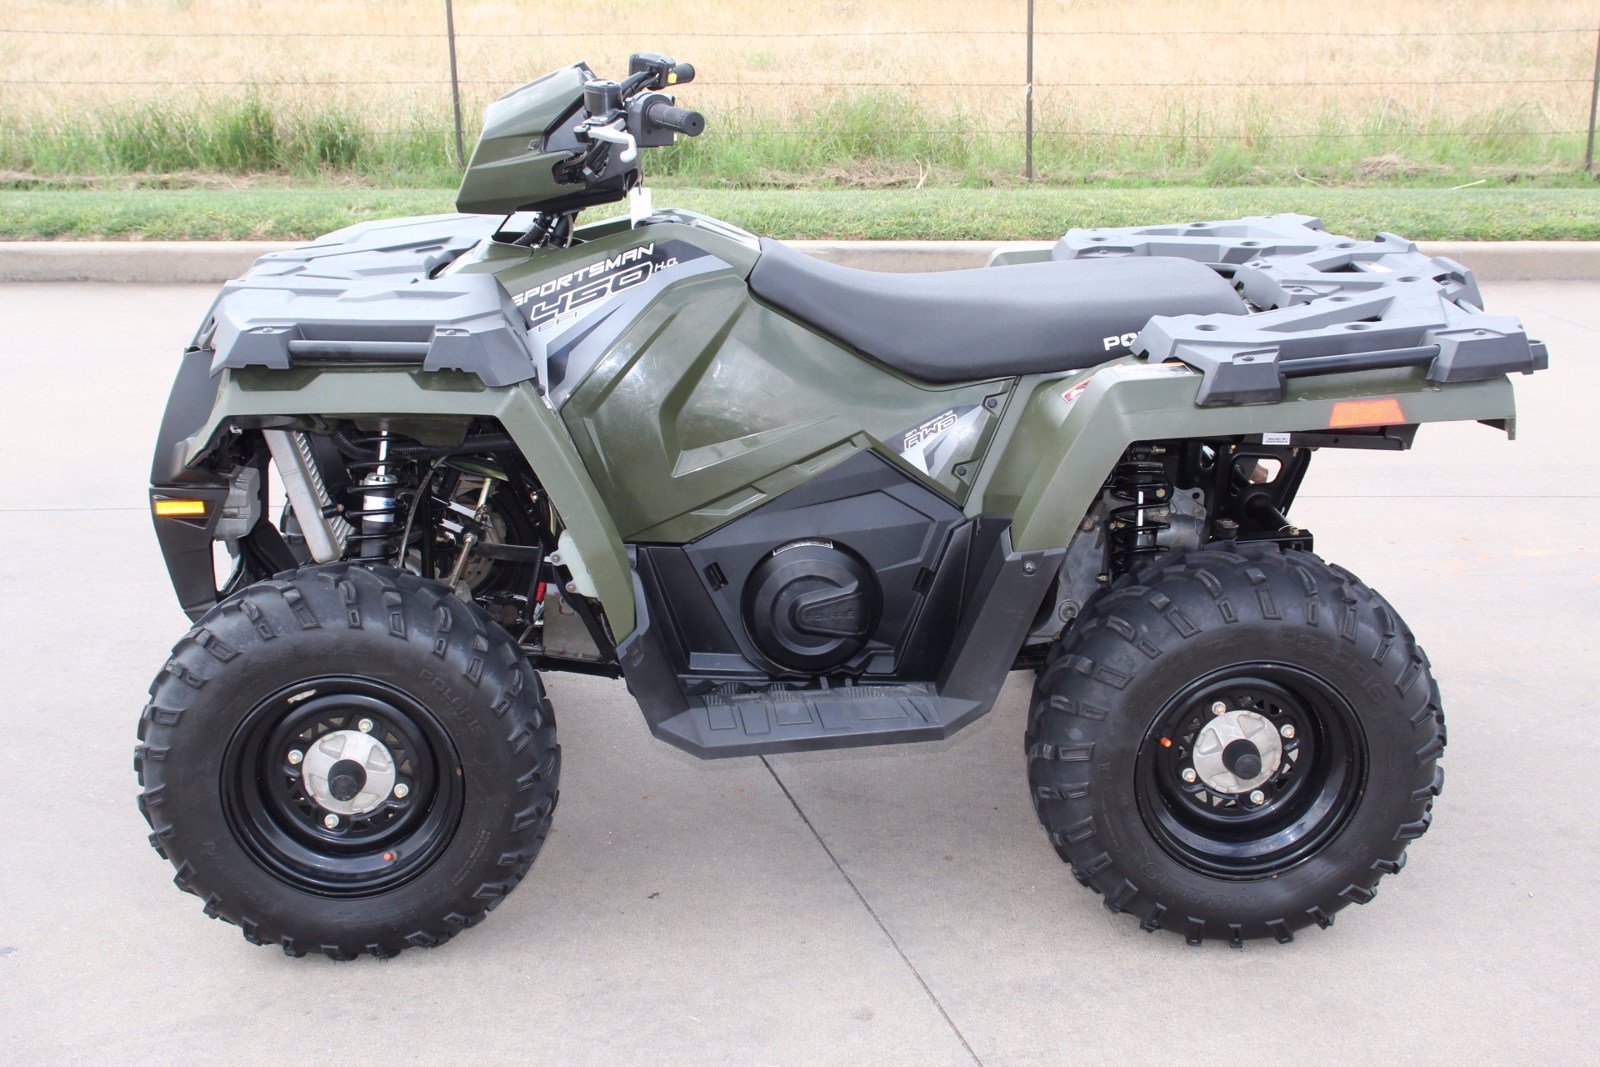 PreOwned 2018 Polaris Sportsman 450 HO in Tyler 9832P Peters Autosports